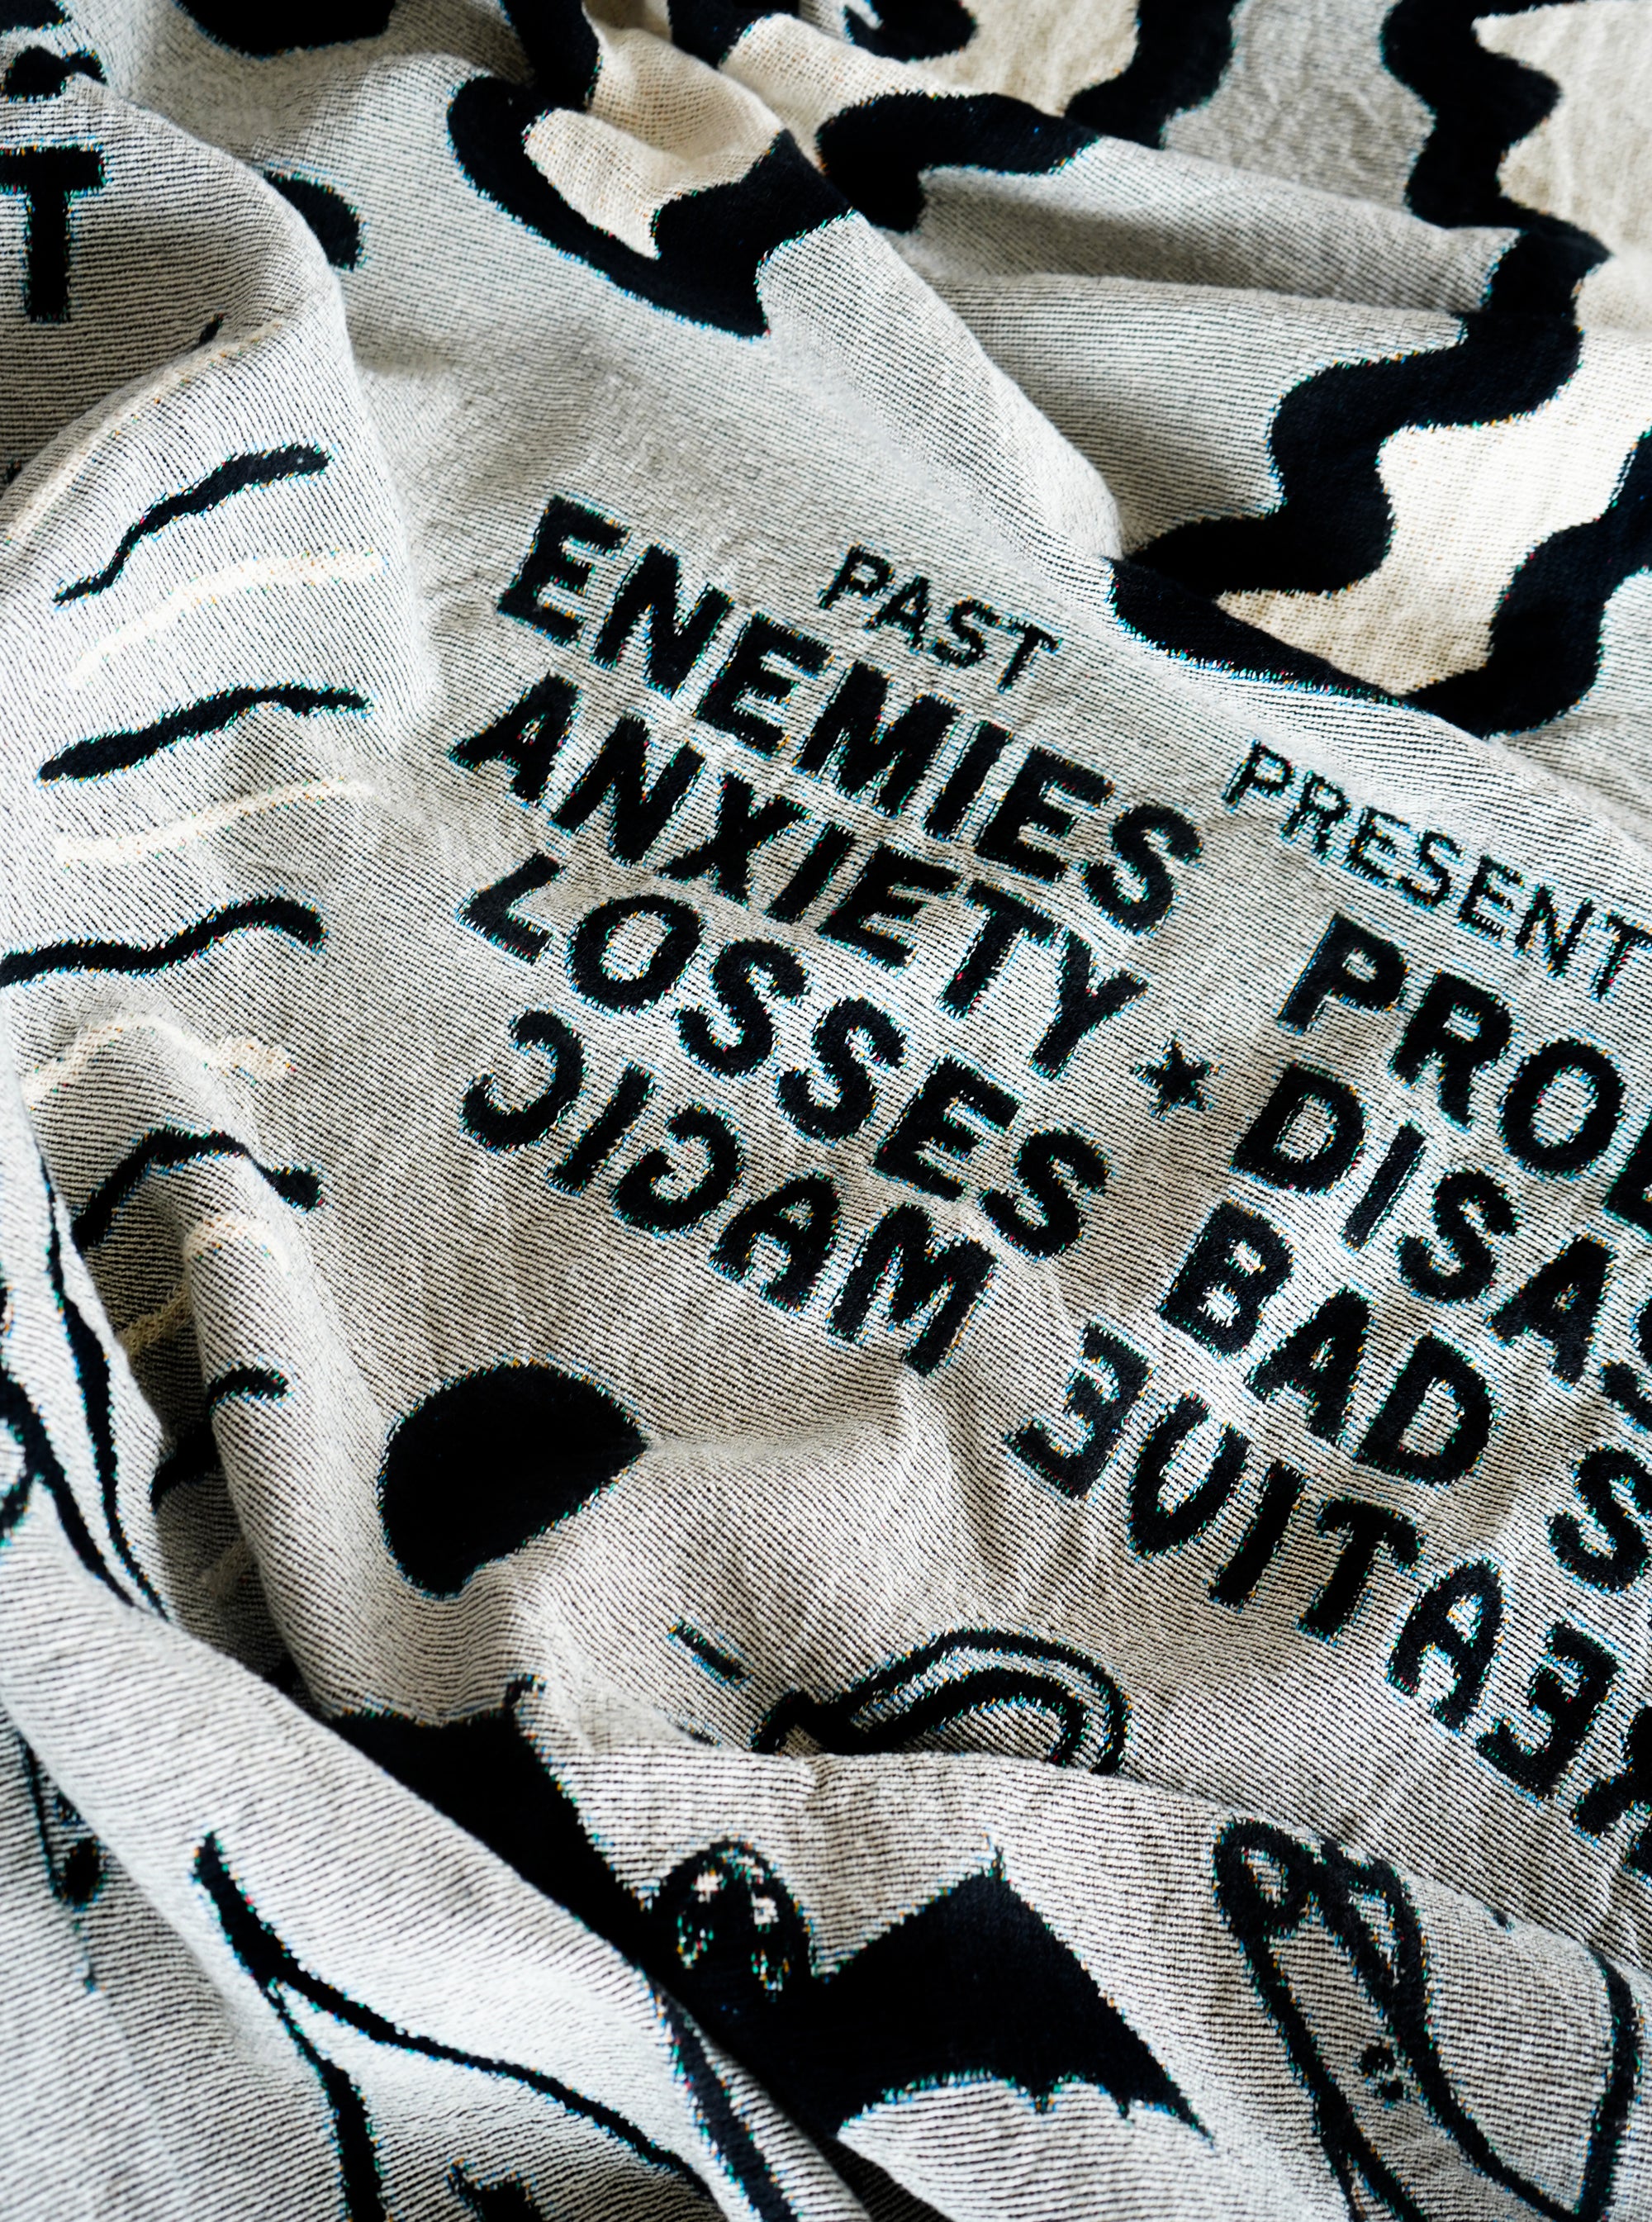 The "Alleged Jinx Removing" Woven Blanket photographed close up to showcase some of the other text that is included in the design.